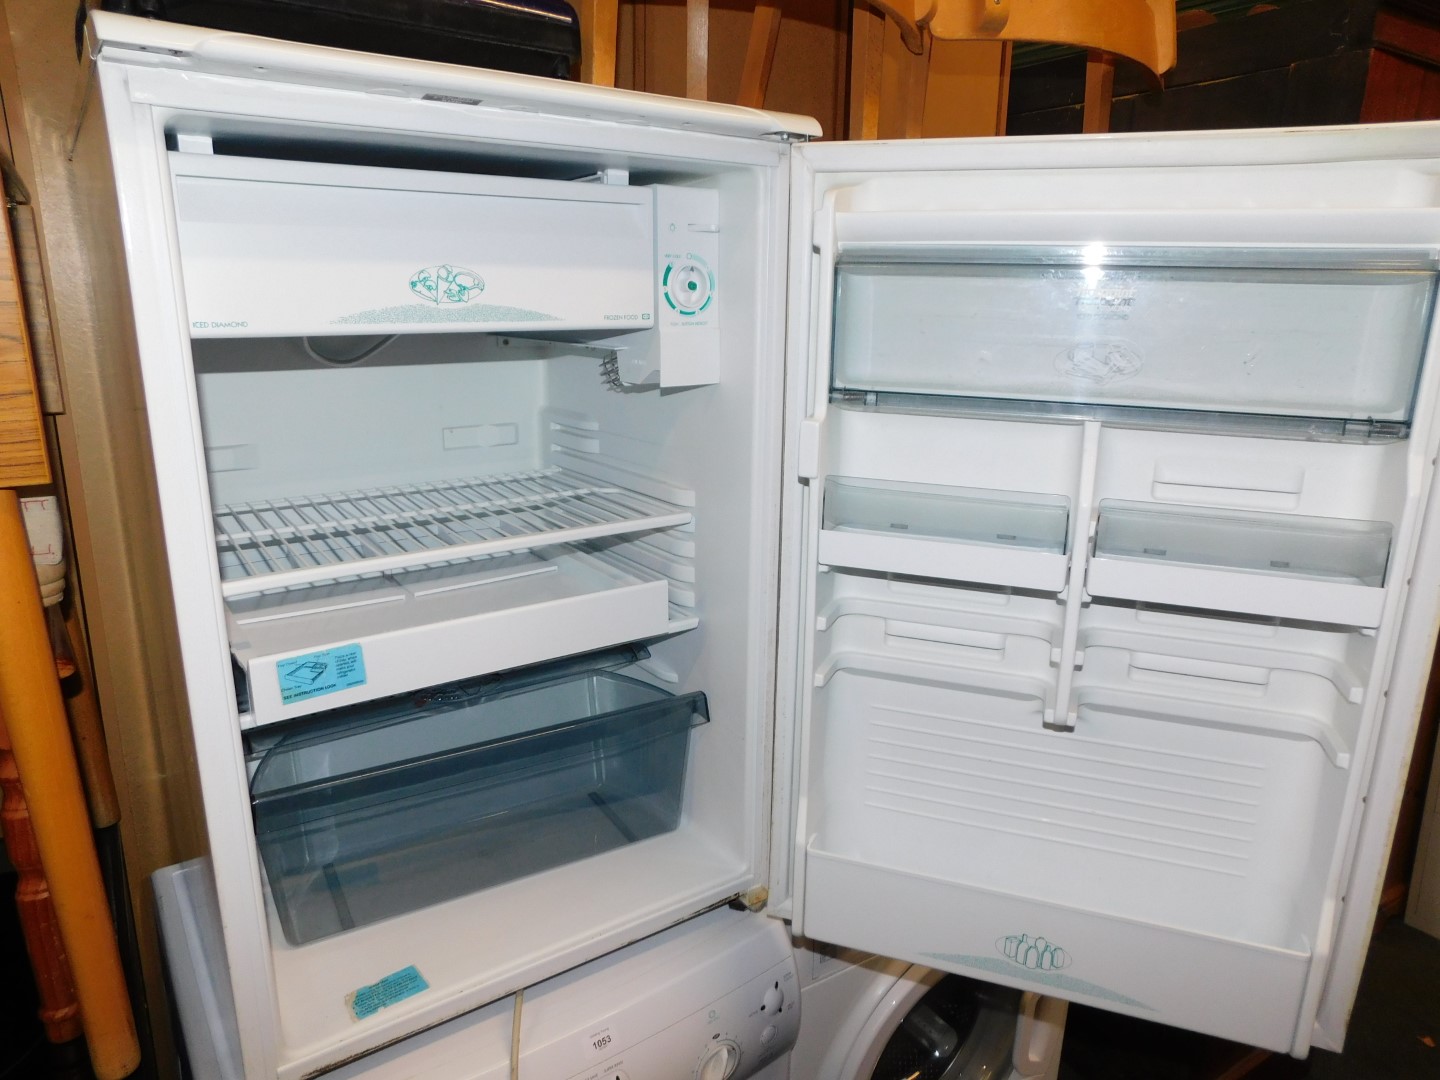 A Hotpoint Iced Diamond under counter fridge, model RS61P. - Image 2 of 2